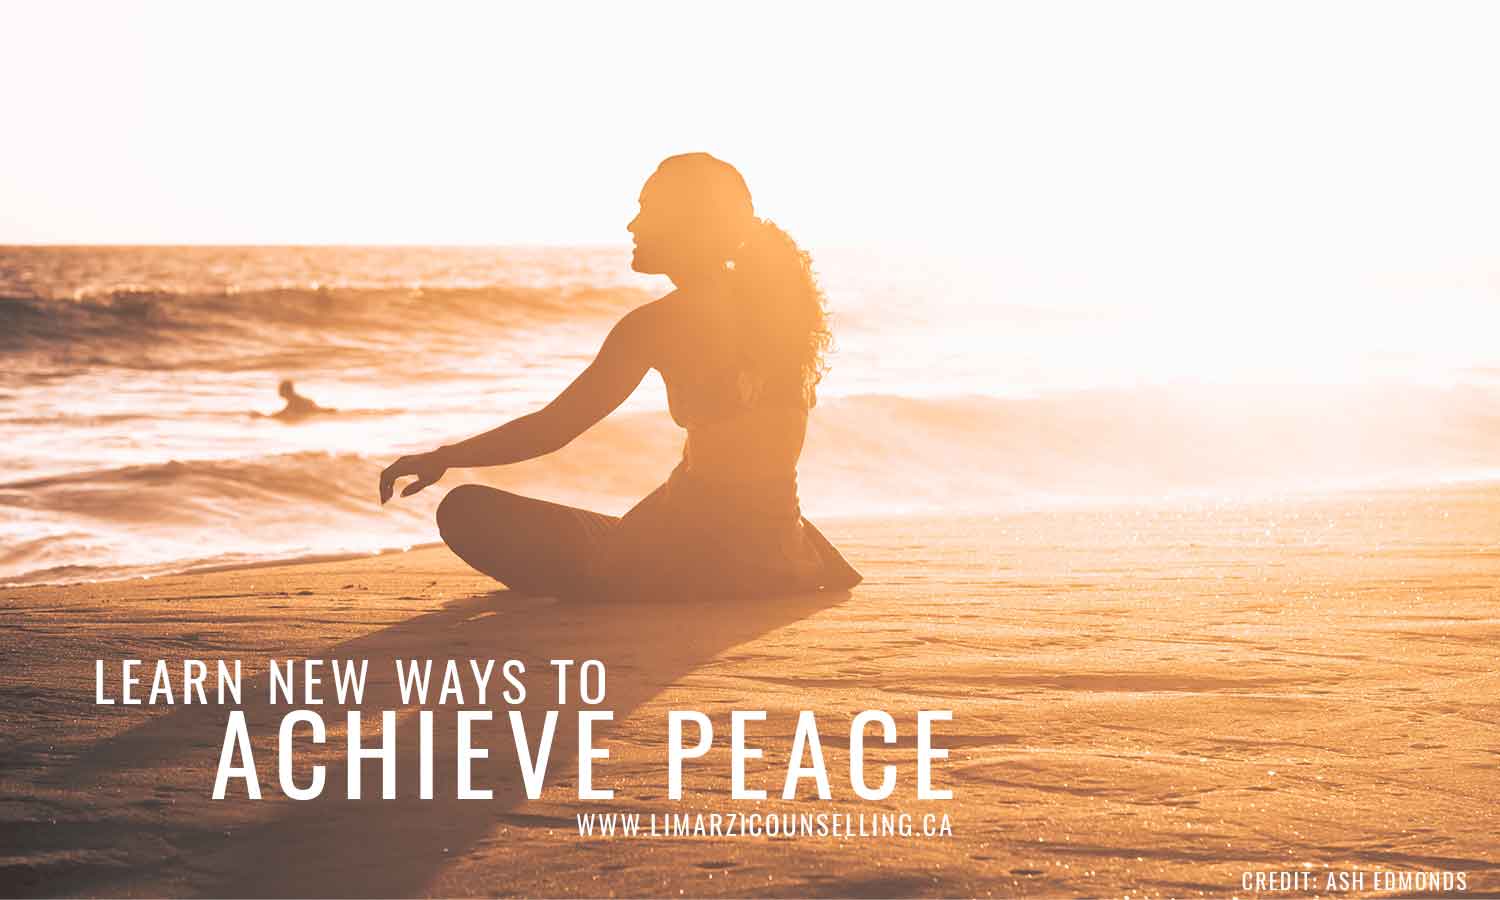 Learn new ways to achieve peace